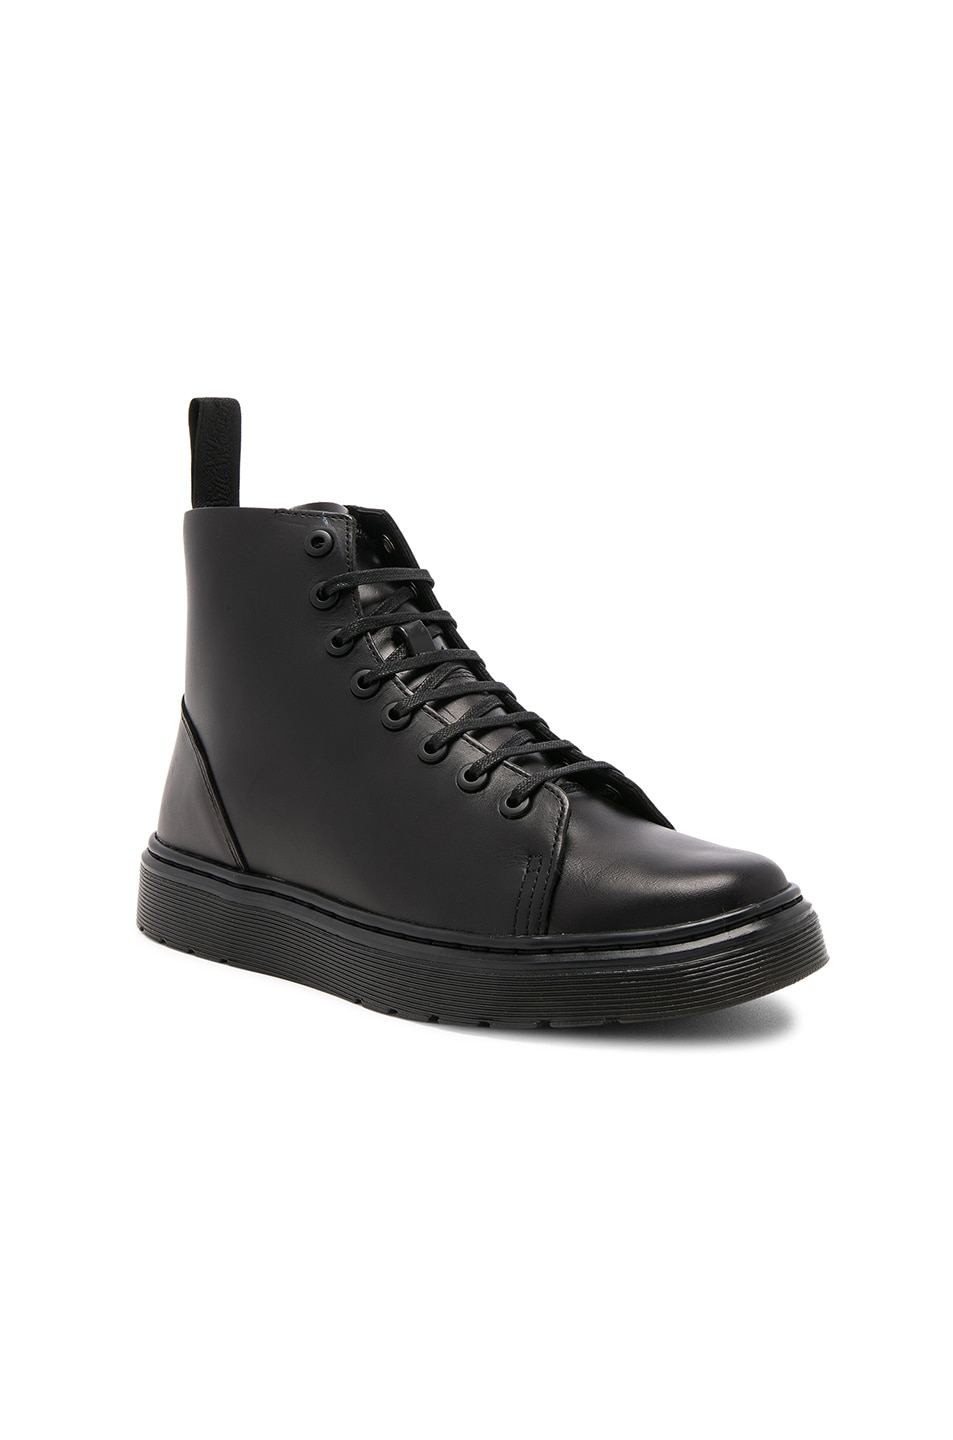 Image 1 of Dr. Martens Talib 8 Eye Leather Boots in Black